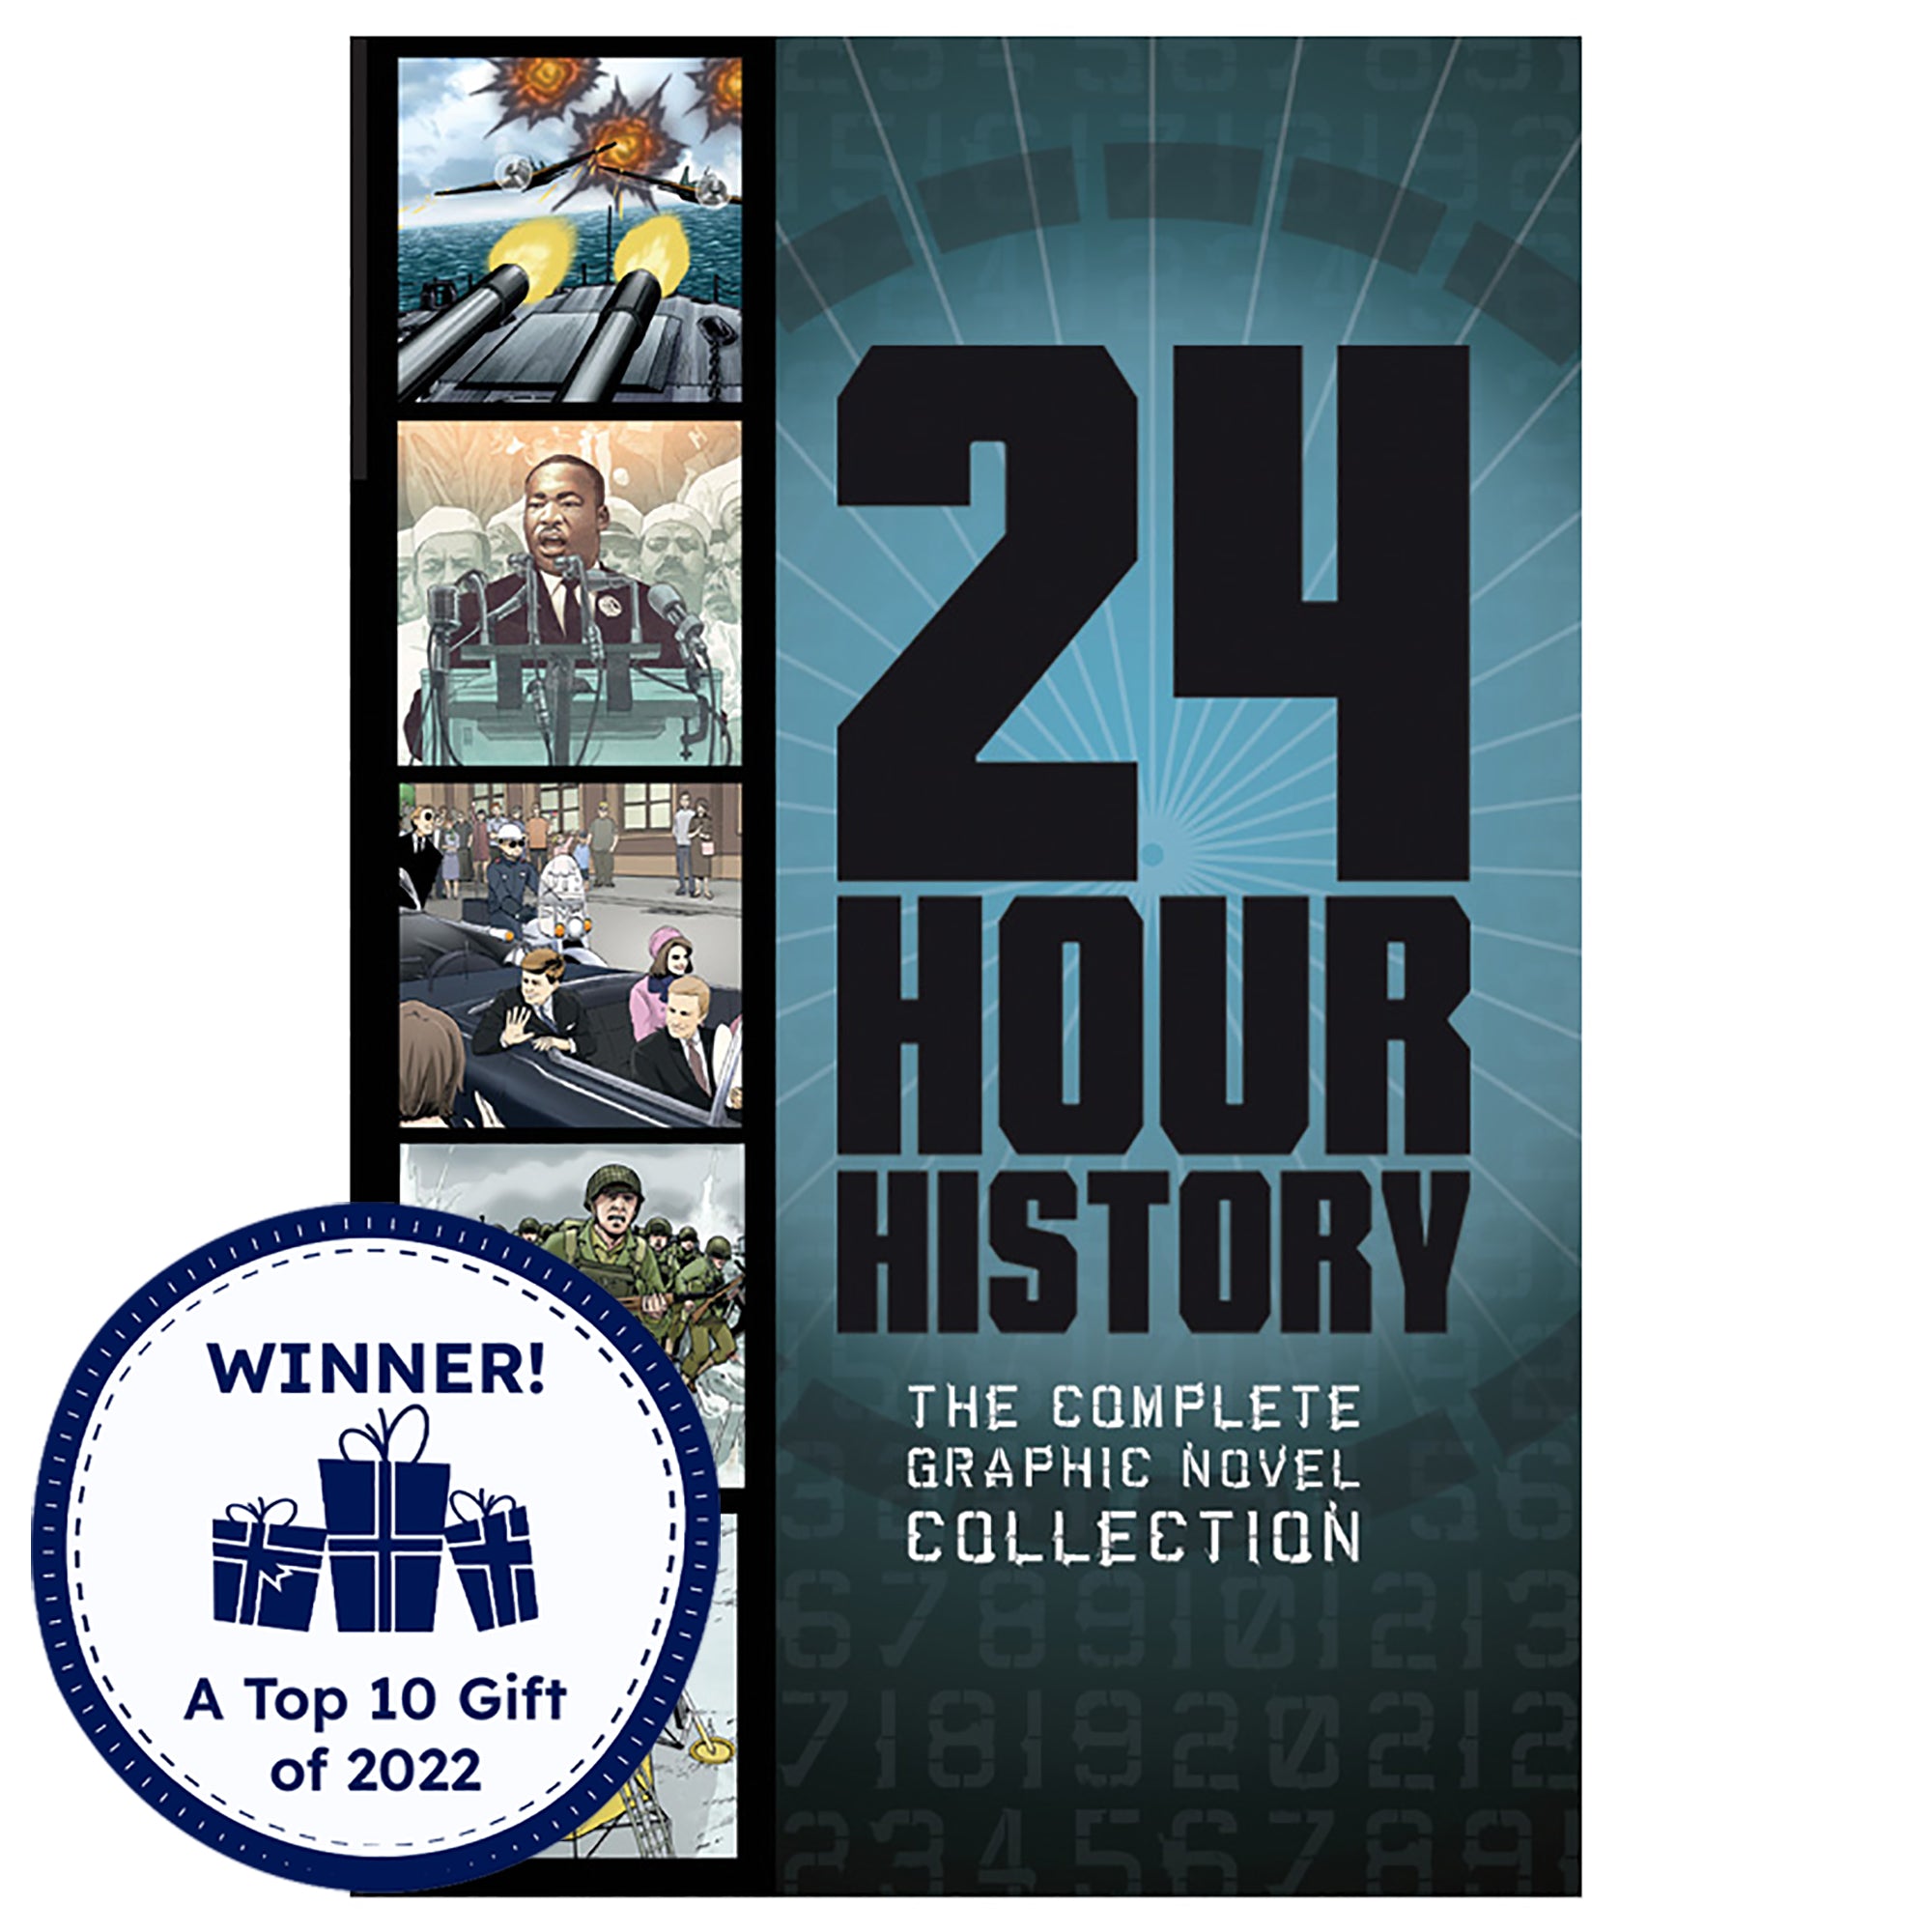 24 Hour History, The Complete Graphic Novel Collection book. The background of the cover is a dark teal with a bright starburst coming out from behind the title. You can faintly see lines of numbers across the entire background. Along the left side are 5 pictures, showing the containing stories. From the top down is The Attack on Pearl Harbor, The Assassination of Martin Luther King Junior, The Assassination of John F Kennedy, D Day, and The Apollo 11 Moon Landing.